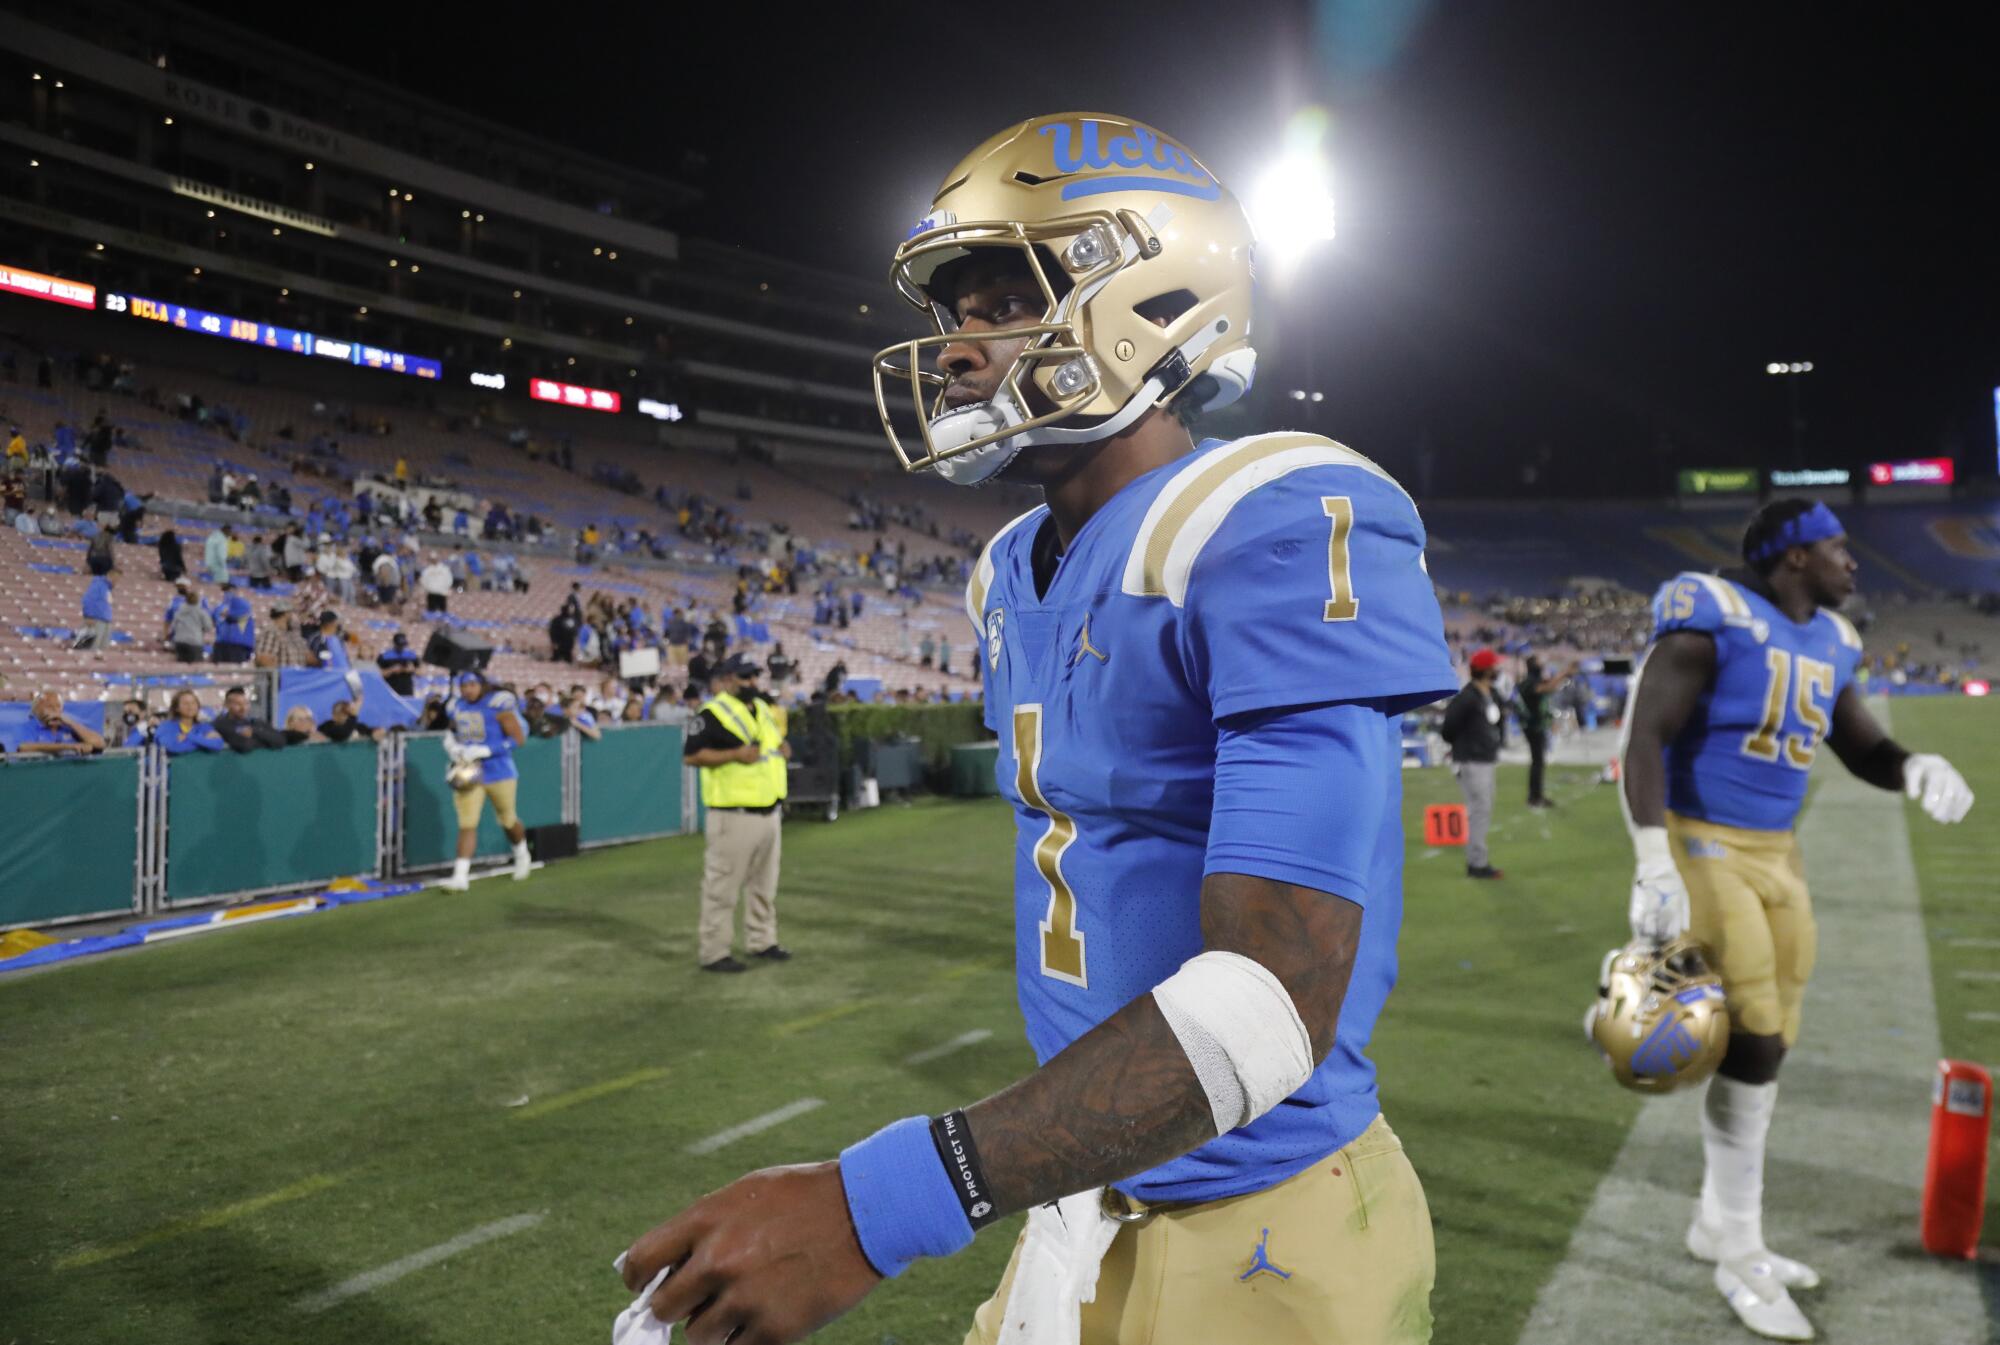 UCLA quarterback Dorian Thompson-Robinson leaves the field after the Bruins' 42-23 loss.